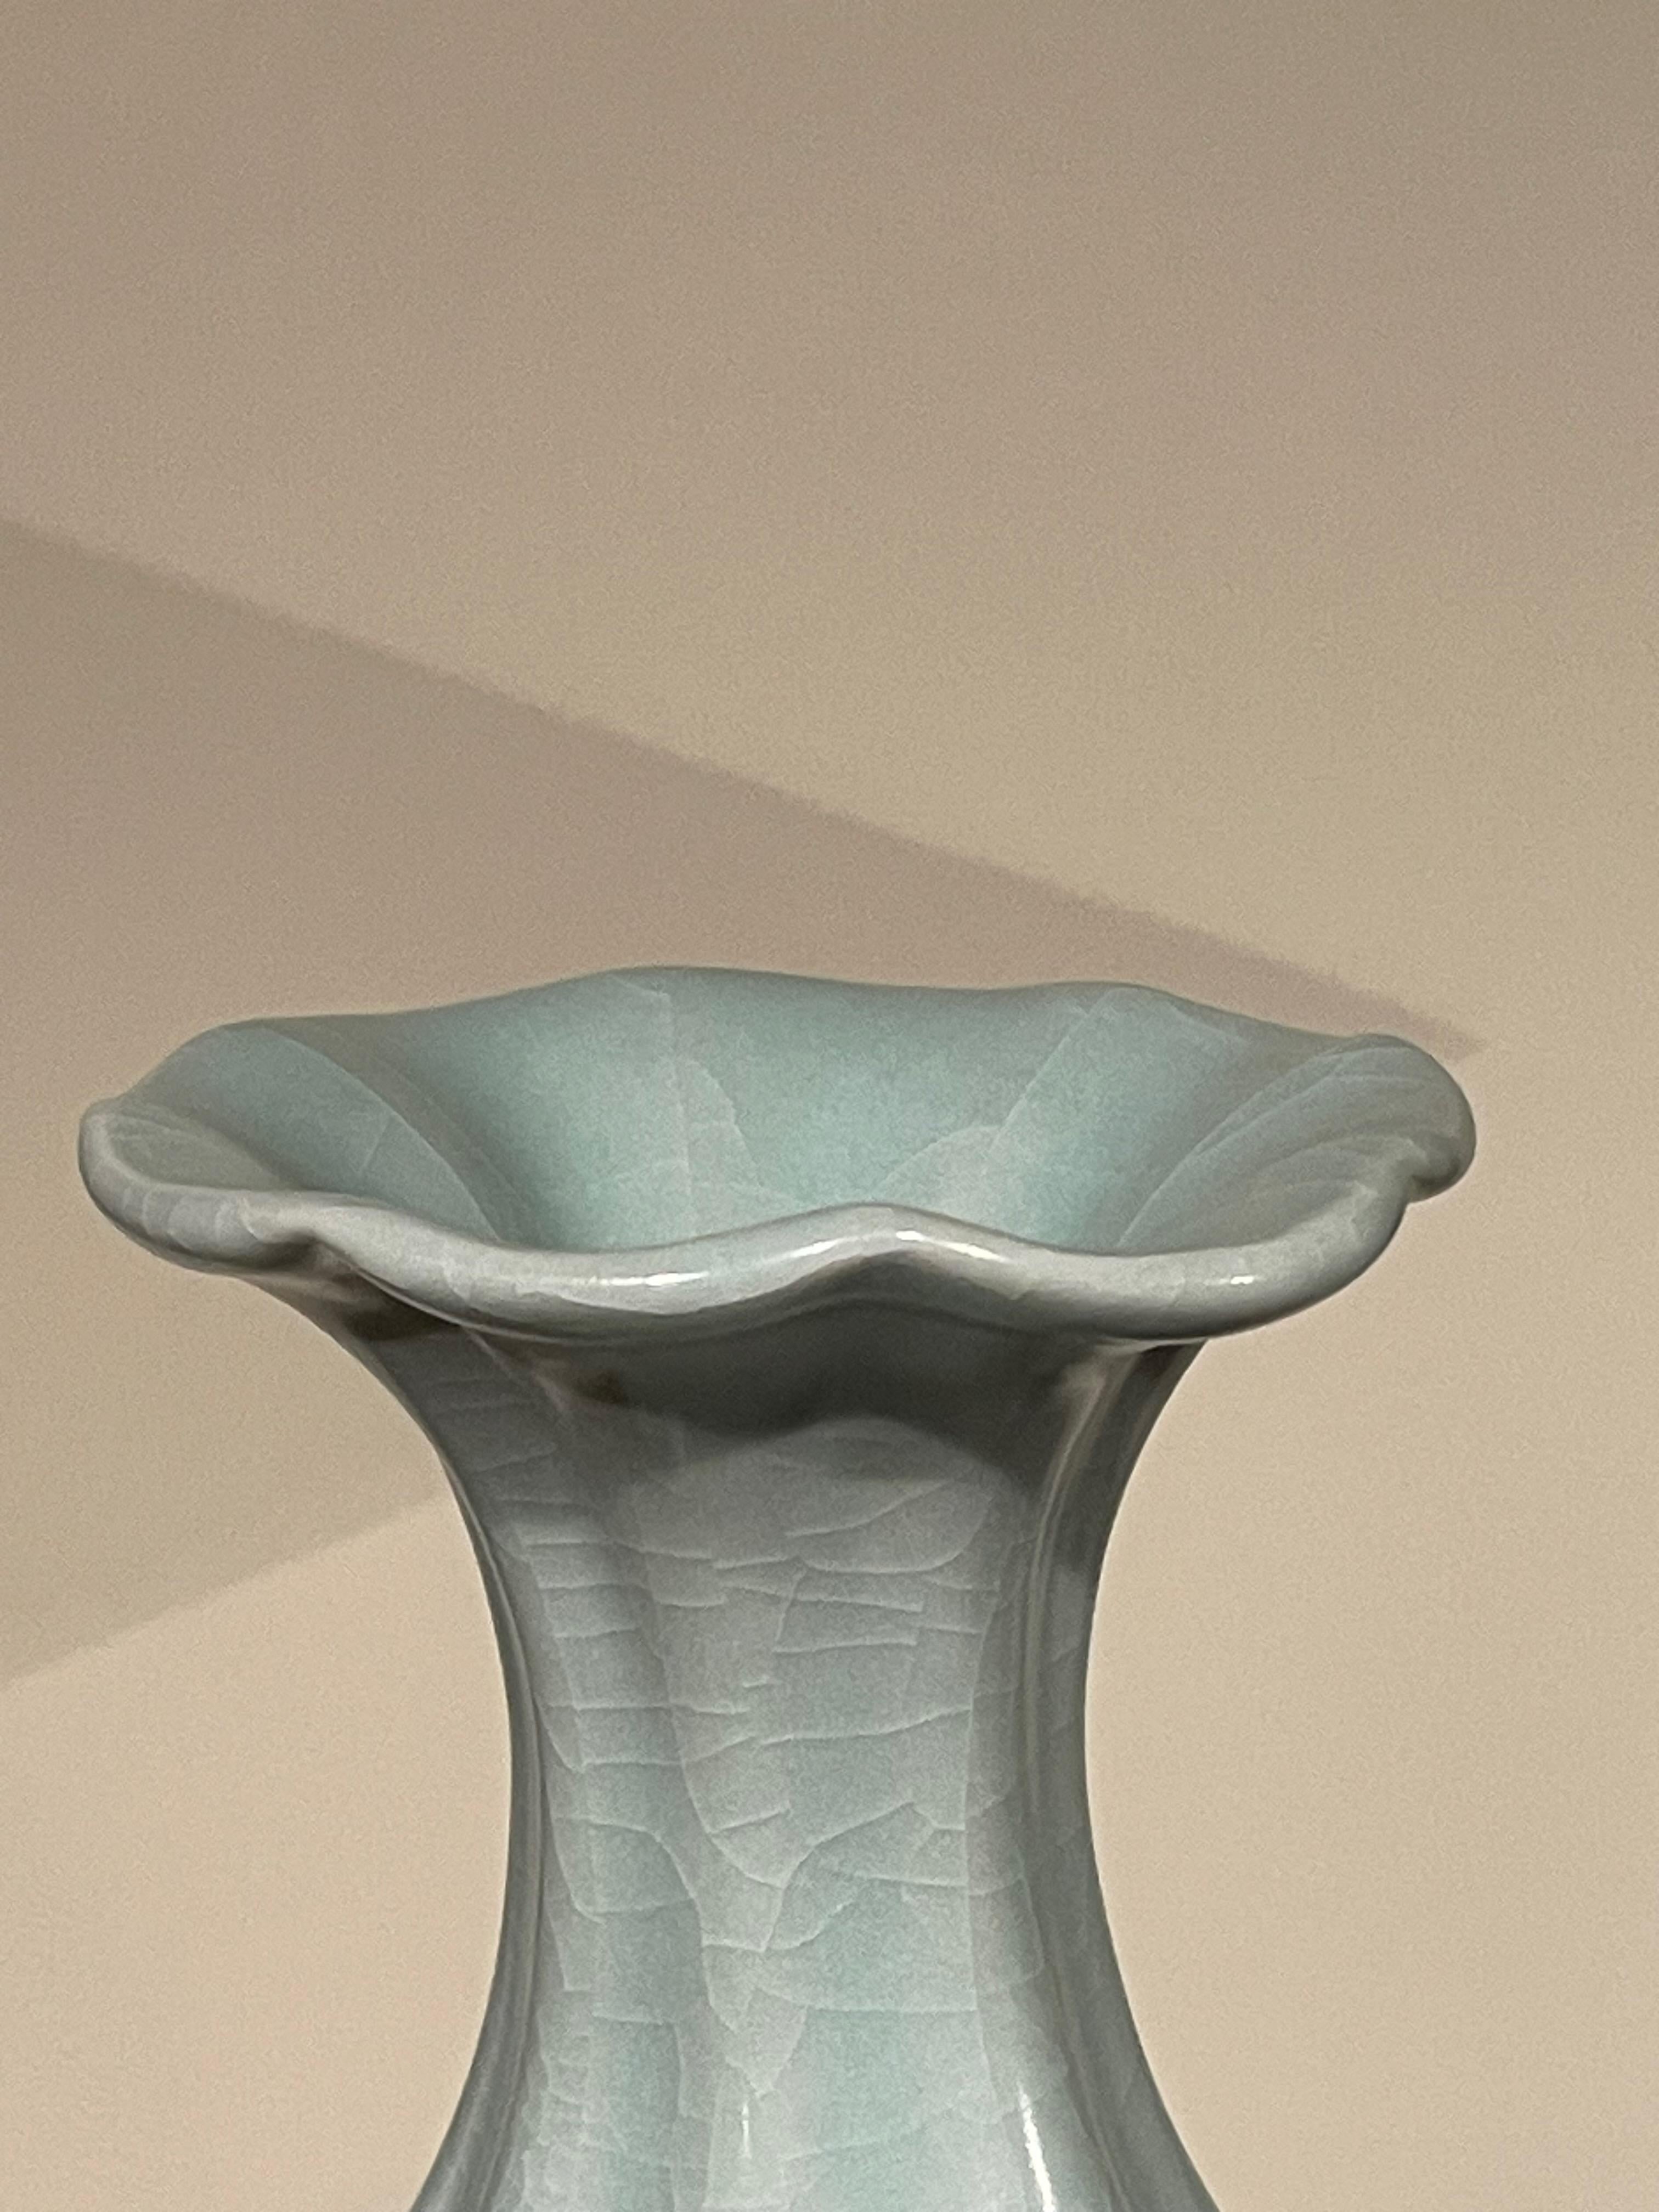 Contemporary Chinese pale turquoise vase.
Wavy top with ribbed curved base.
Large collection available with varying sizes and shapes.
